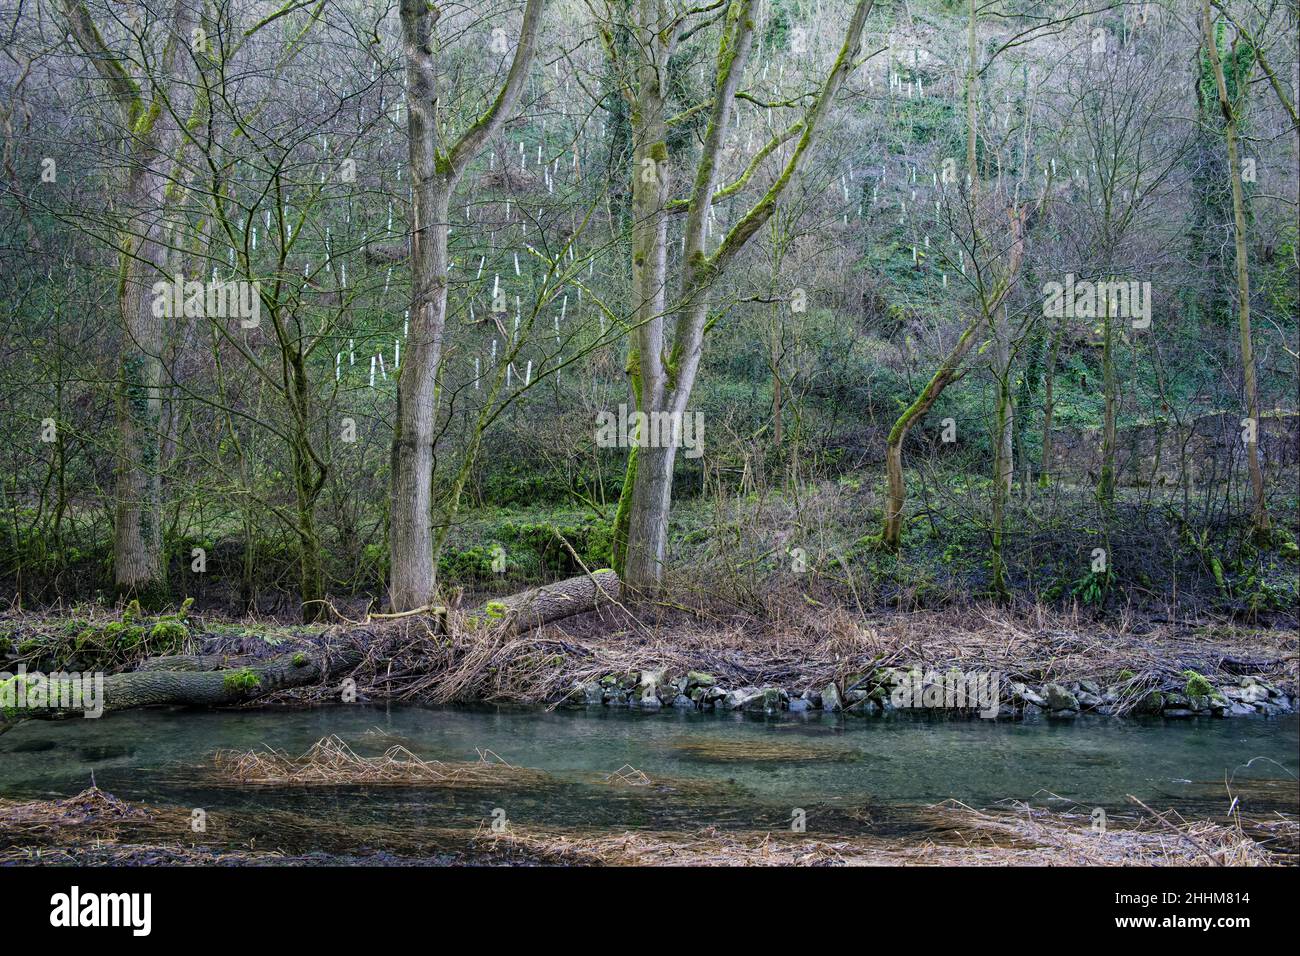 New tree plantings in the Lathkill Dale National Nature Reserve, Peak District National Park, Derbyshire, England Stock Photo